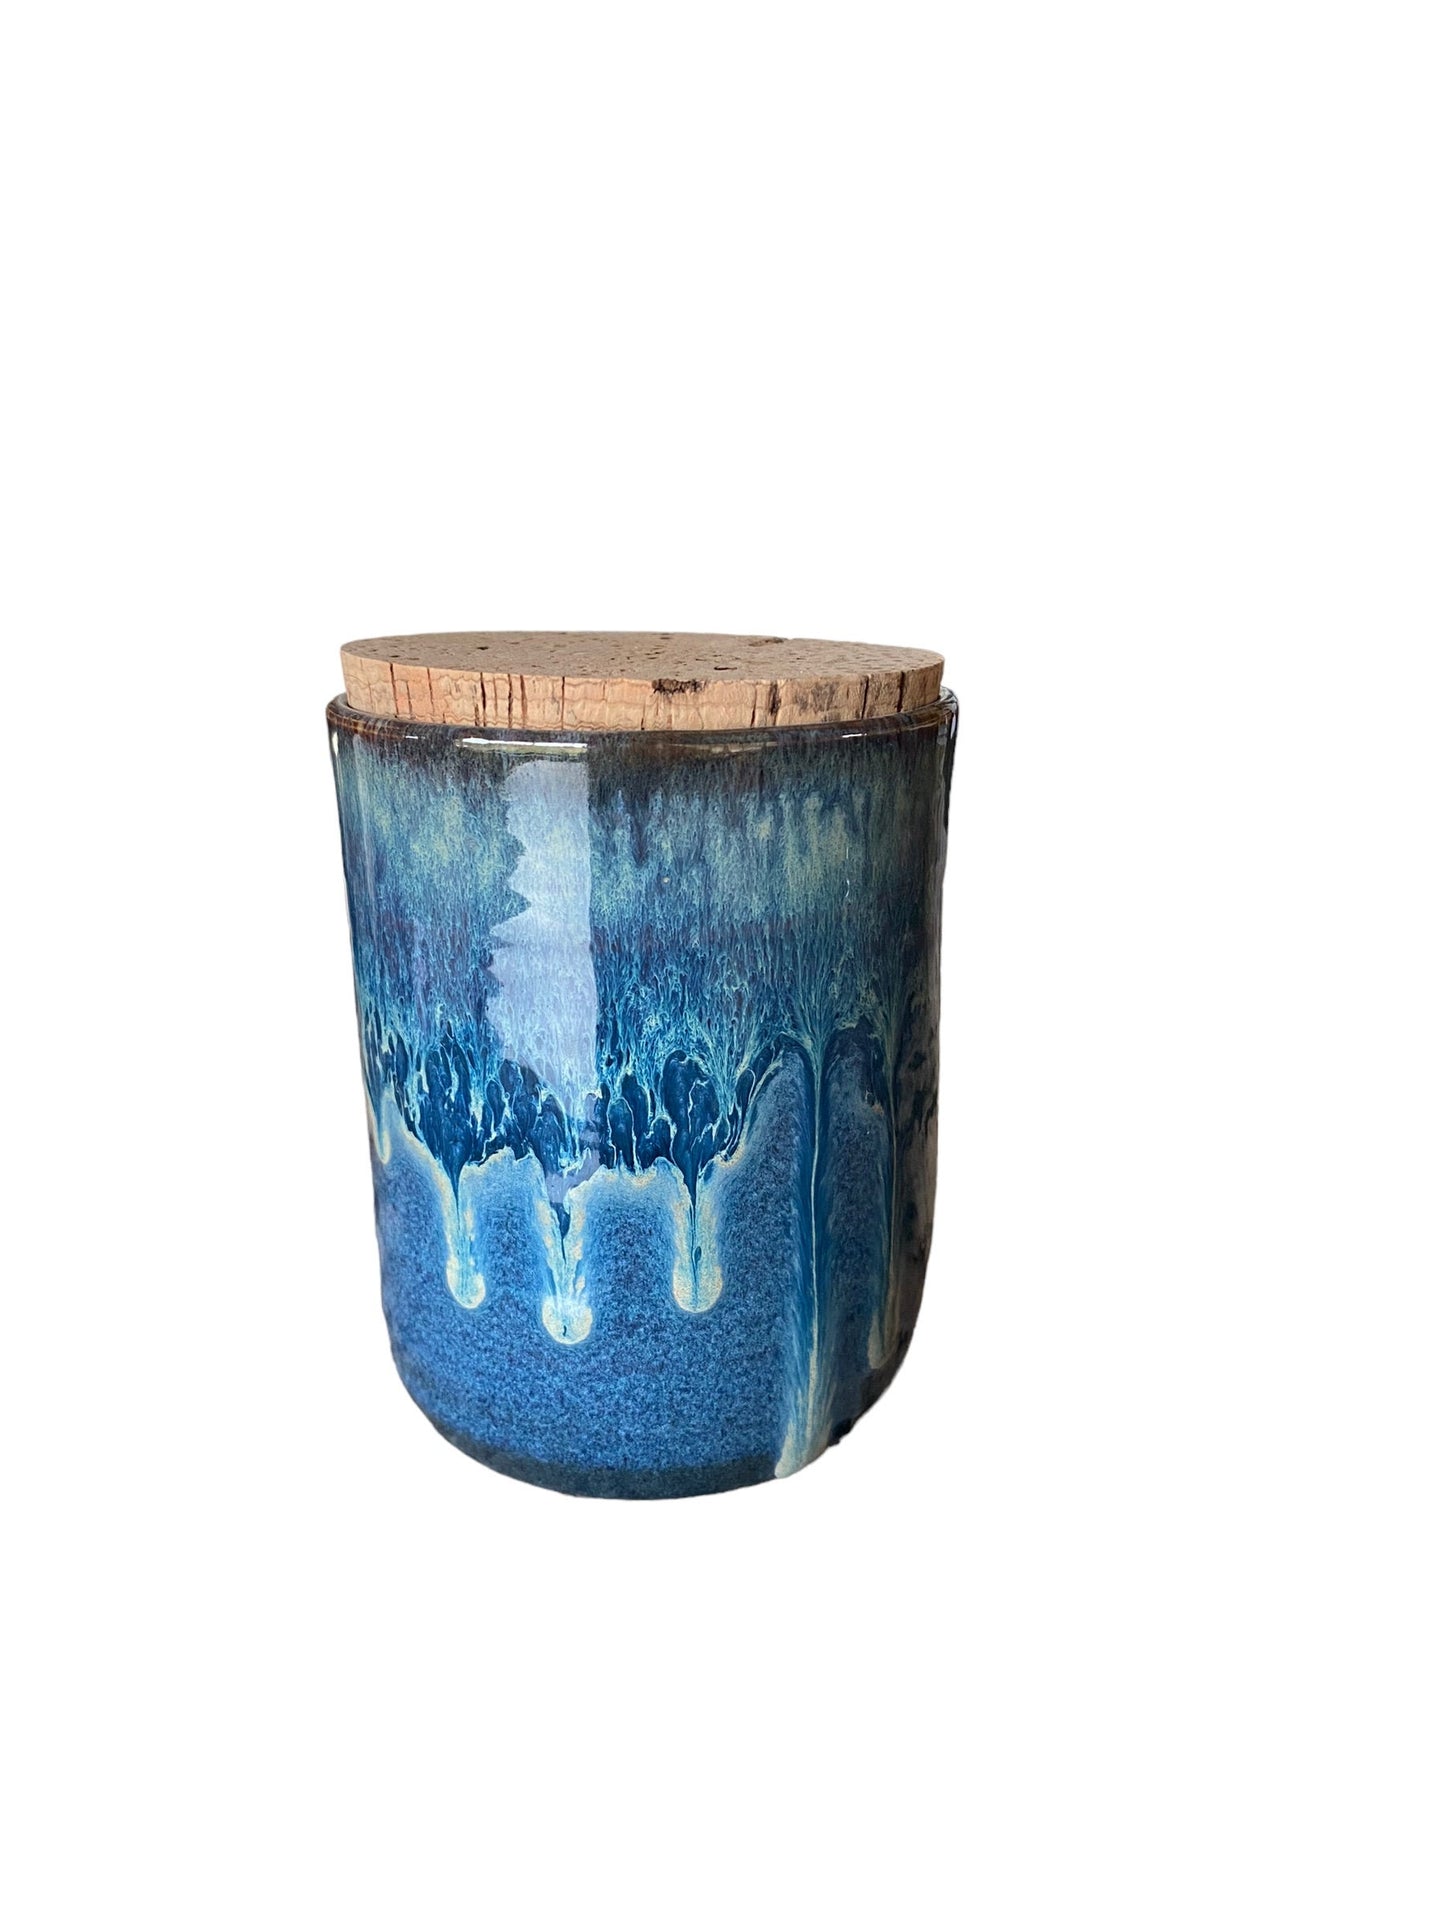 Artisan-Crafted Reactive Blue Lidded Grlic Jar: Handmade Pottery Canister for Unique Home Decor and Storage Solutions